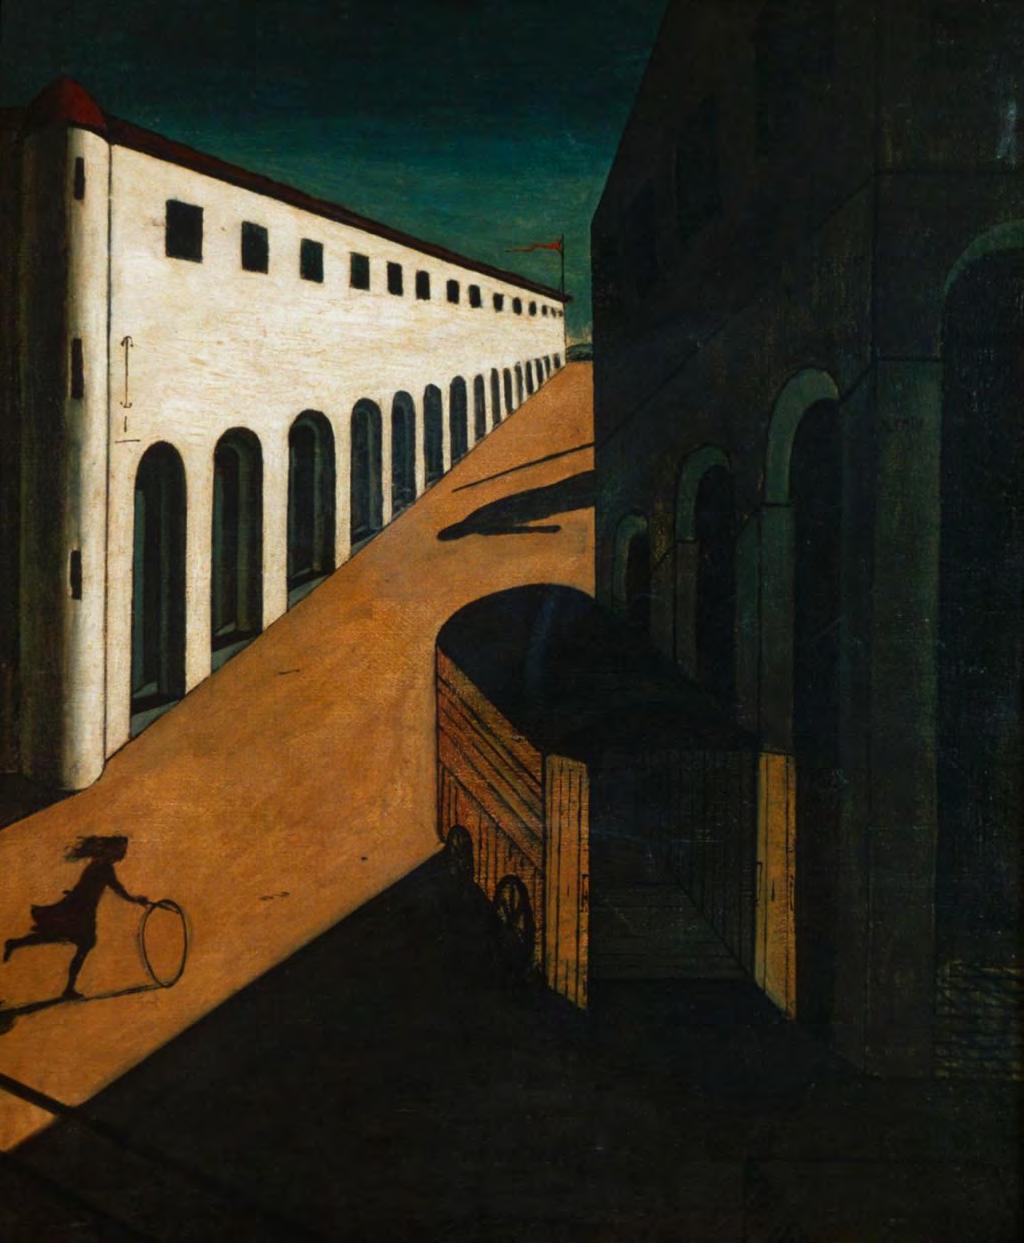 Giorgio de Chirico: He began painting nightmare fantasies 15 years before Surrealism existed. He relied upon irrational childhood fears for his subjects.